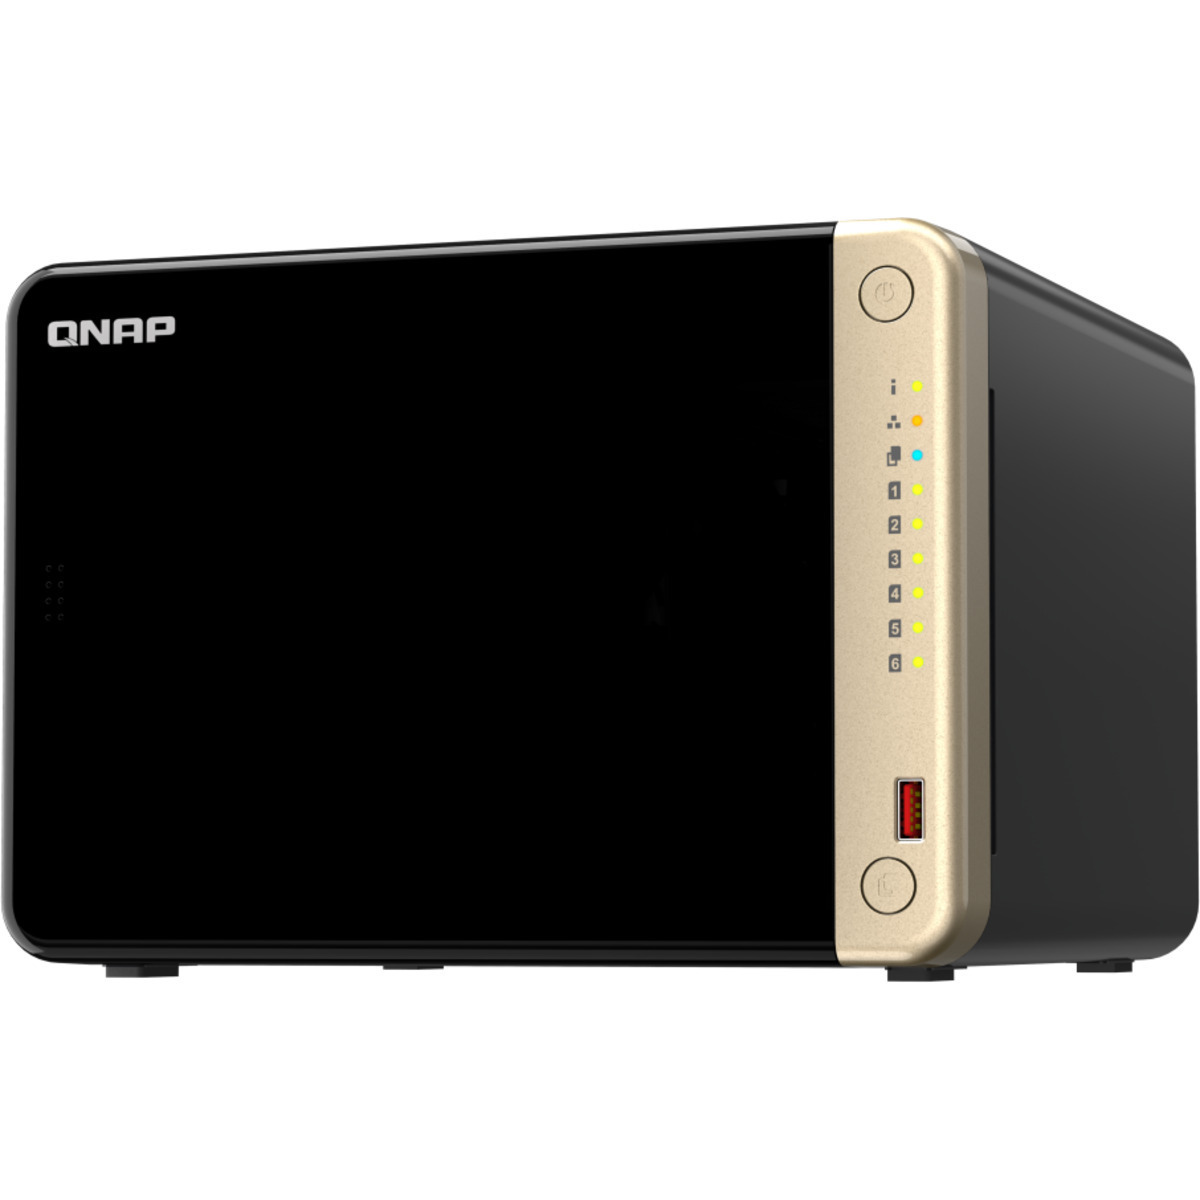 QNAP TS-664 32tb 6-Bay Desktop Multimedia / Power User / Business NAS - Network Attached Storage Device 4x8tb Seagate IronWolf Pro ST8000NT001 3.5 7200rpm SATA 6Gb/s HDD NAS Class Drives Installed - Burn-In Tested - ON SALE TS-664